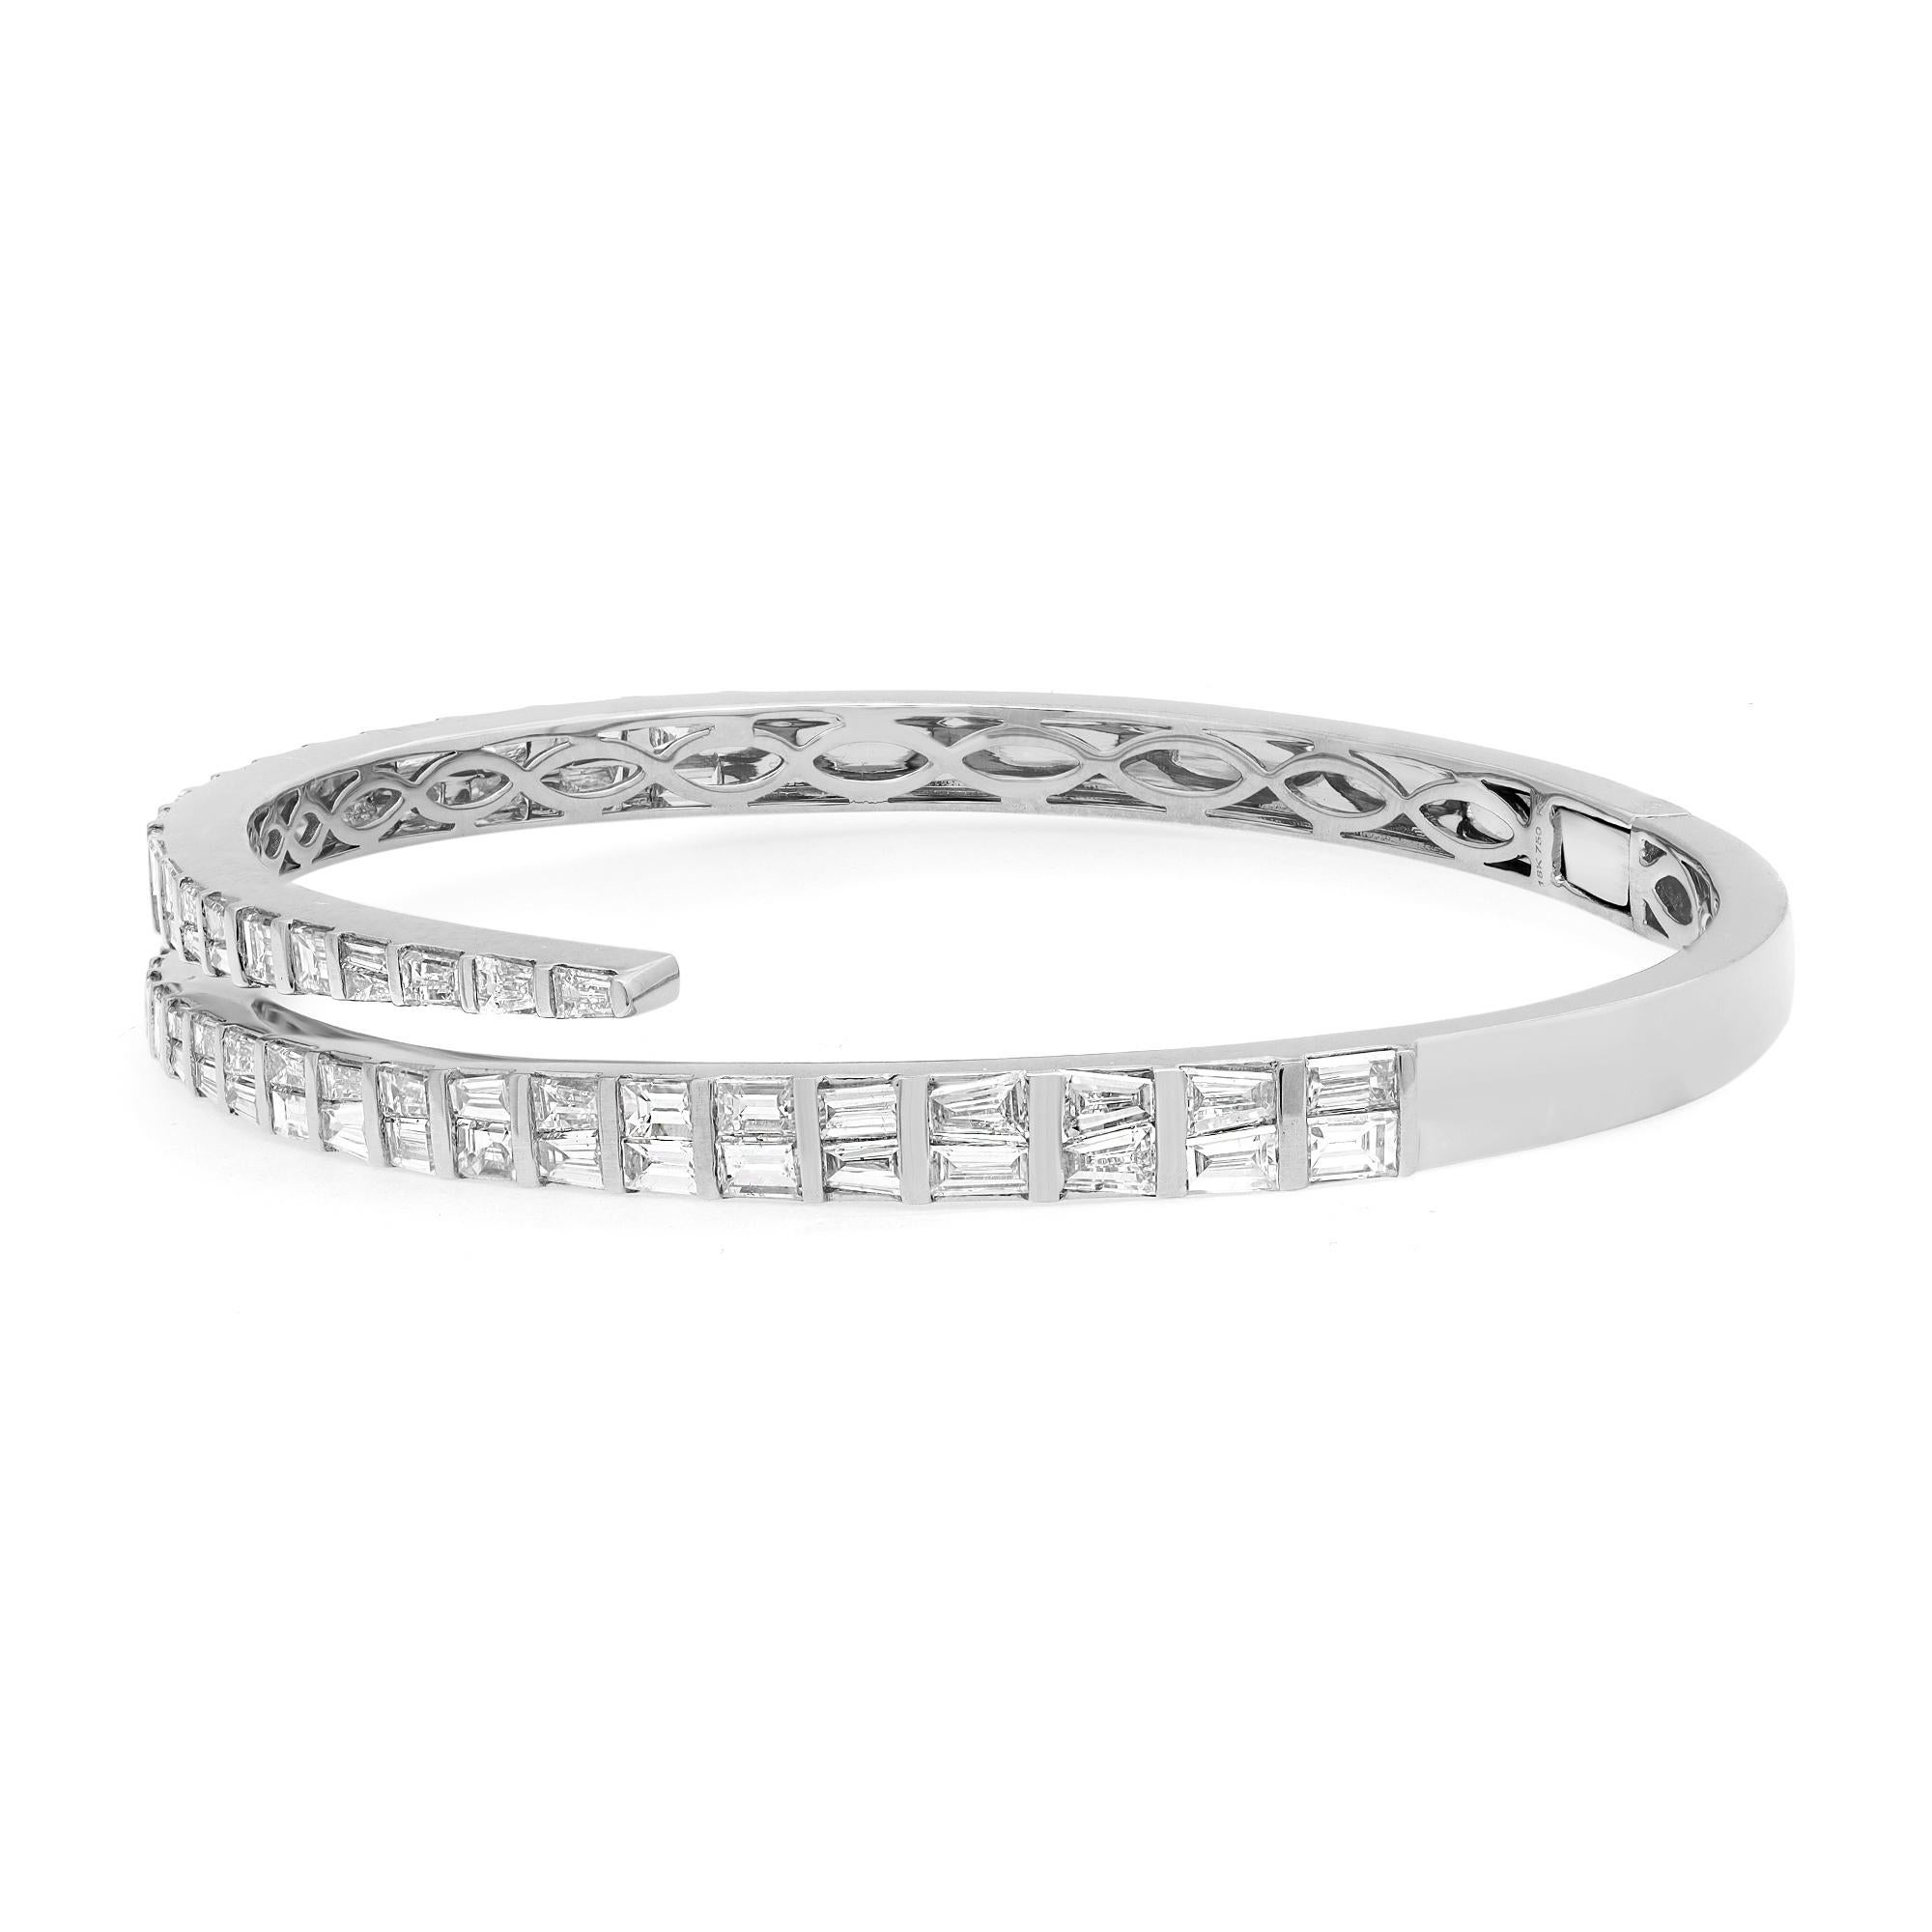 Let your style shine with this fancy and elegant diamond bangle bracelet. Crafted in 18k white gold, this stunning bracelet features 78 channel set tapered Baguette cut shimmering diamonds with a total weight of 4.27 carats. Diamond color G-H and